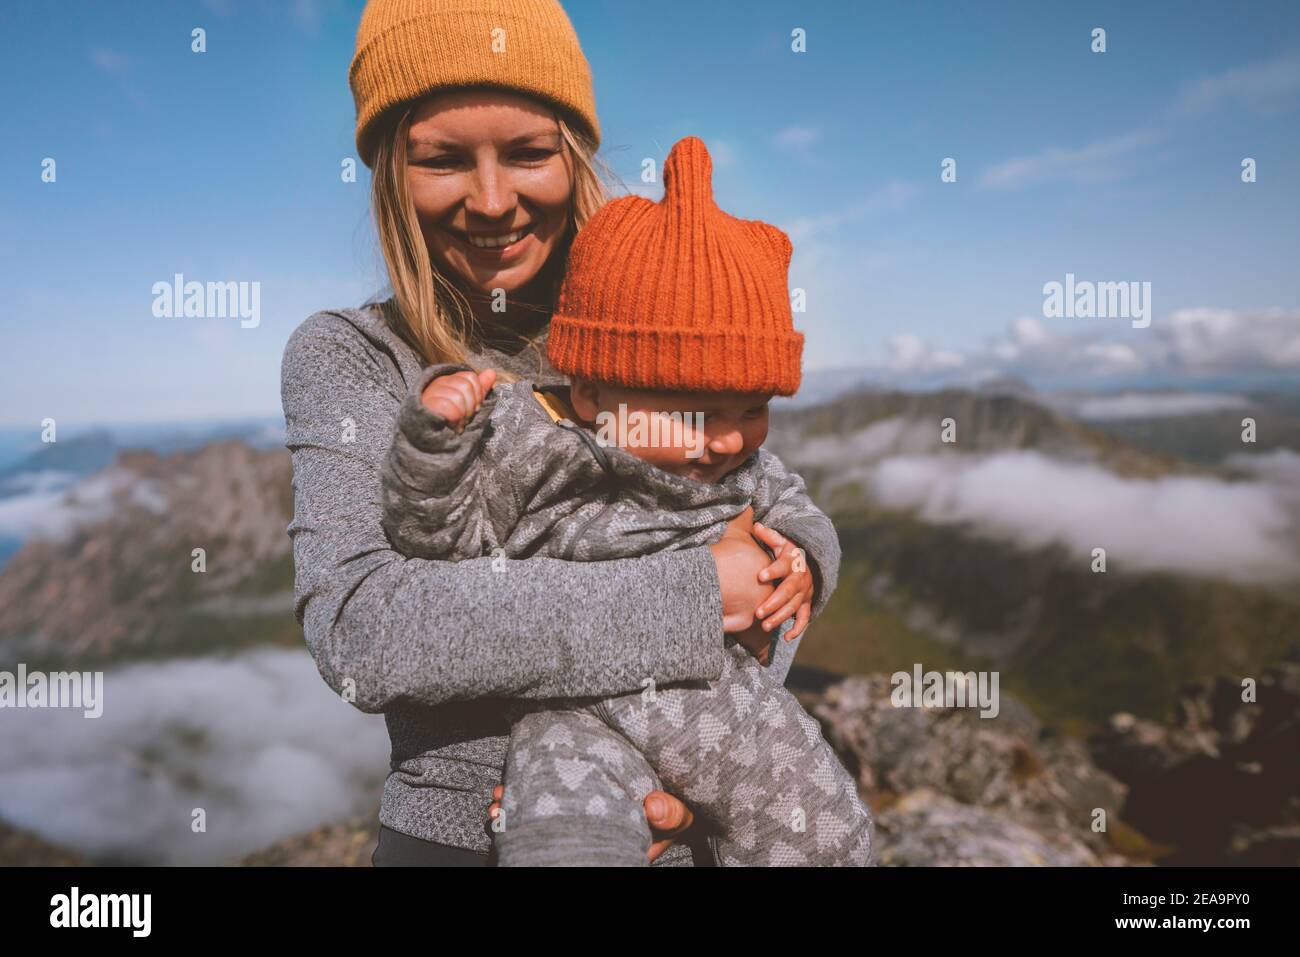 Mother hiking with kid in mountains family traveling outdoor active healthy lifestyle vacation woman with infant child happy emotions Stock Photo